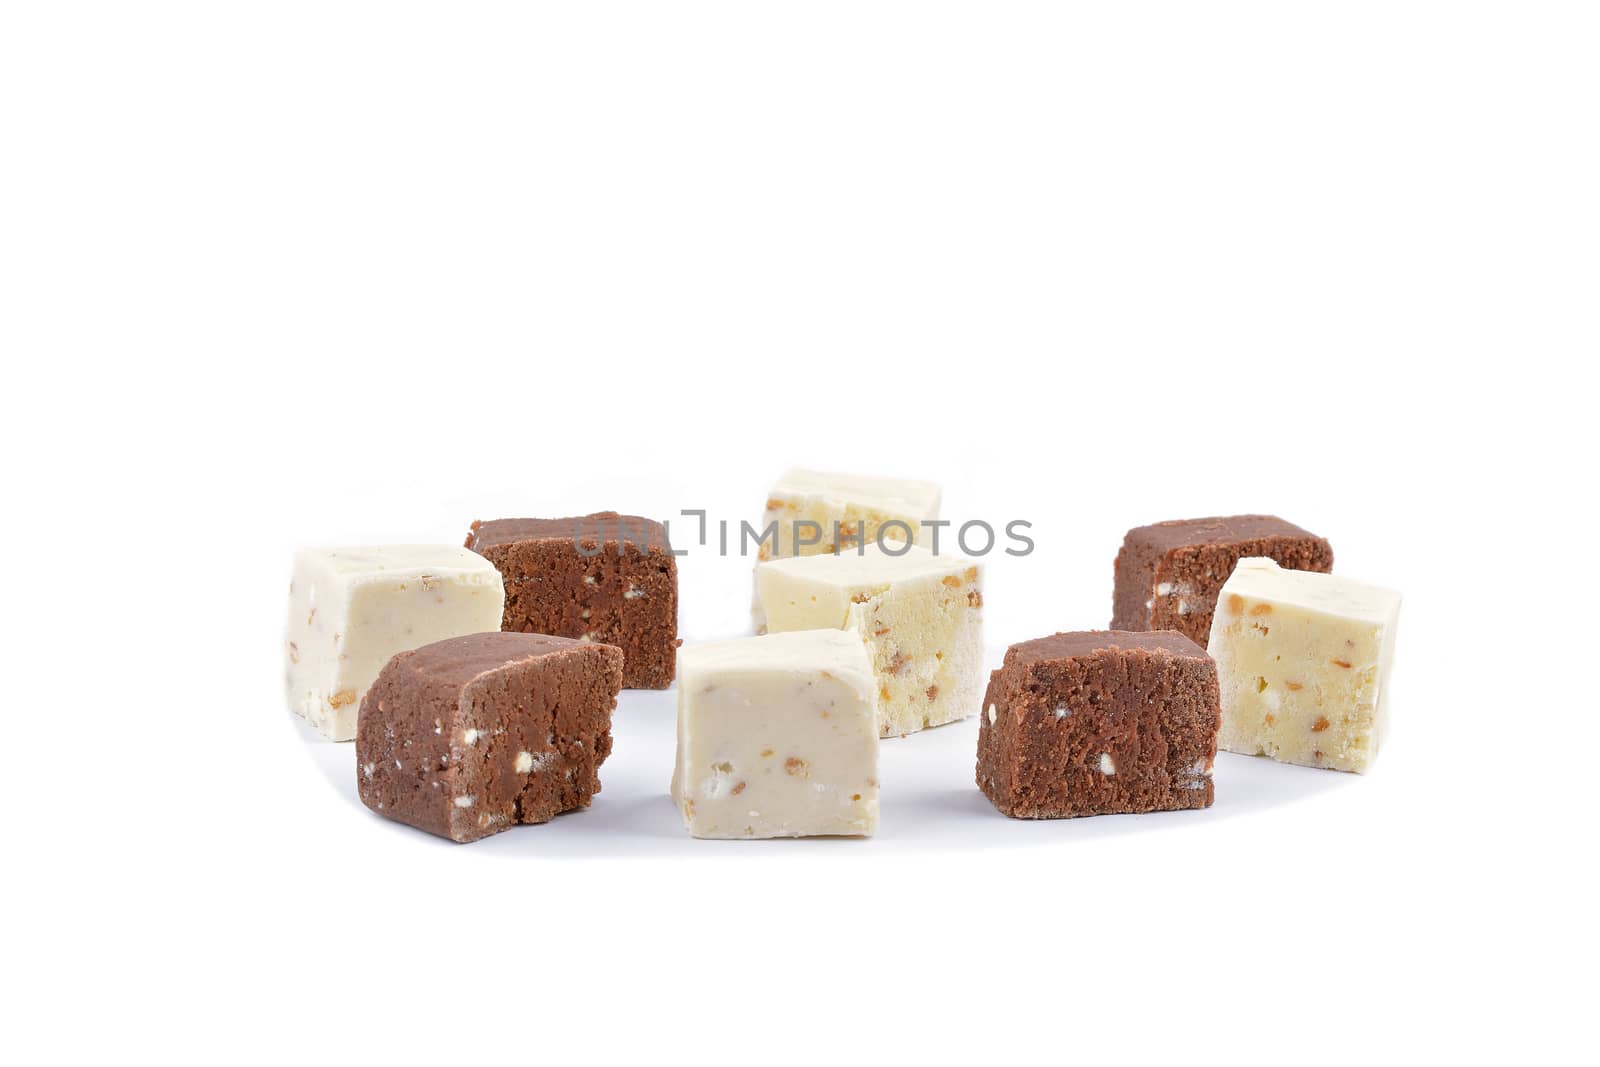 fresh homemade natural chocolate bar on white background by constantinhurghea